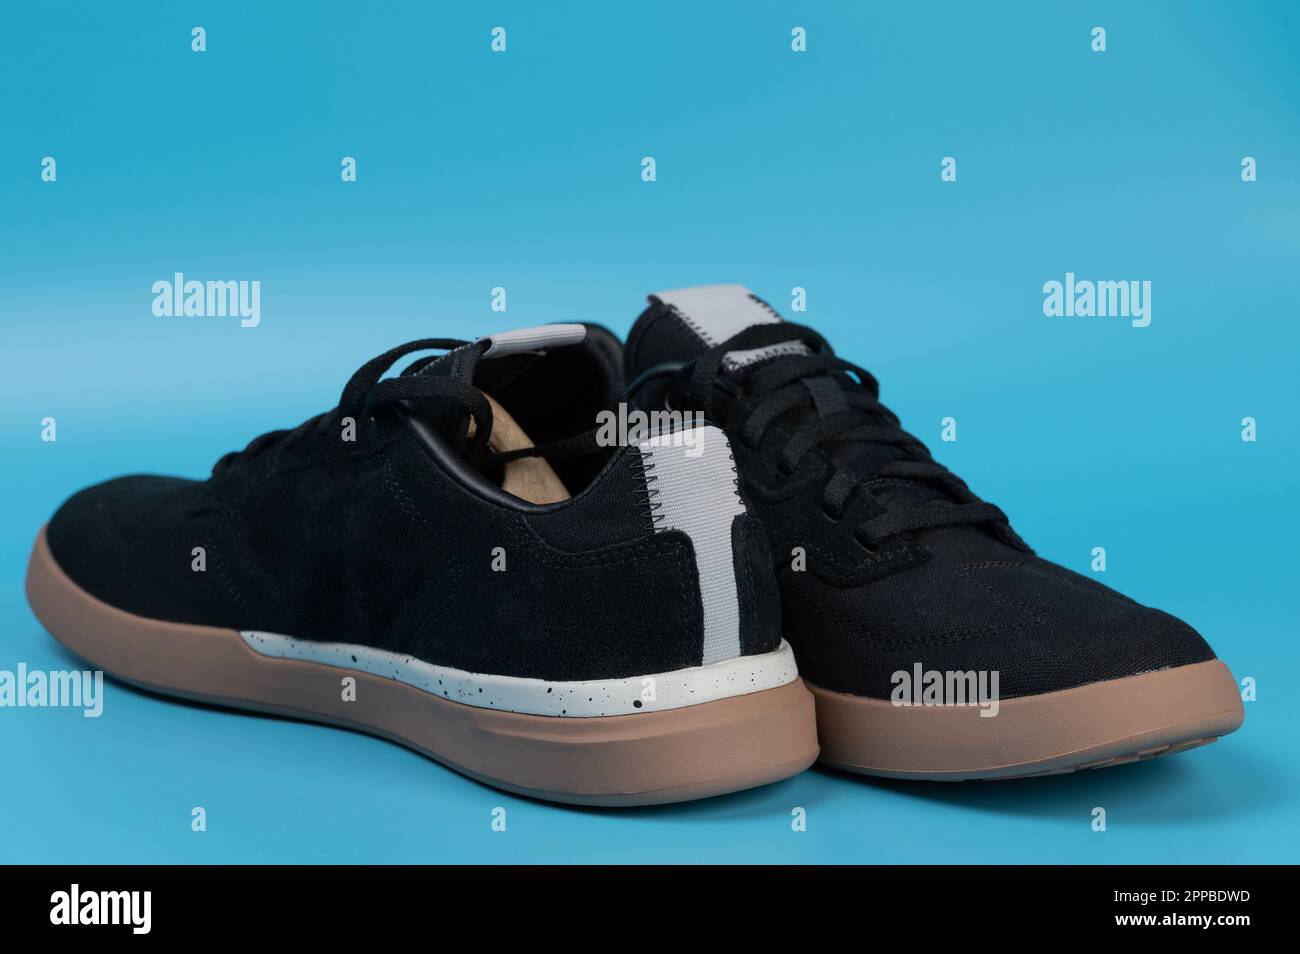 Pair of black casual shoes with laces isolated on blue studio background Stock Photo